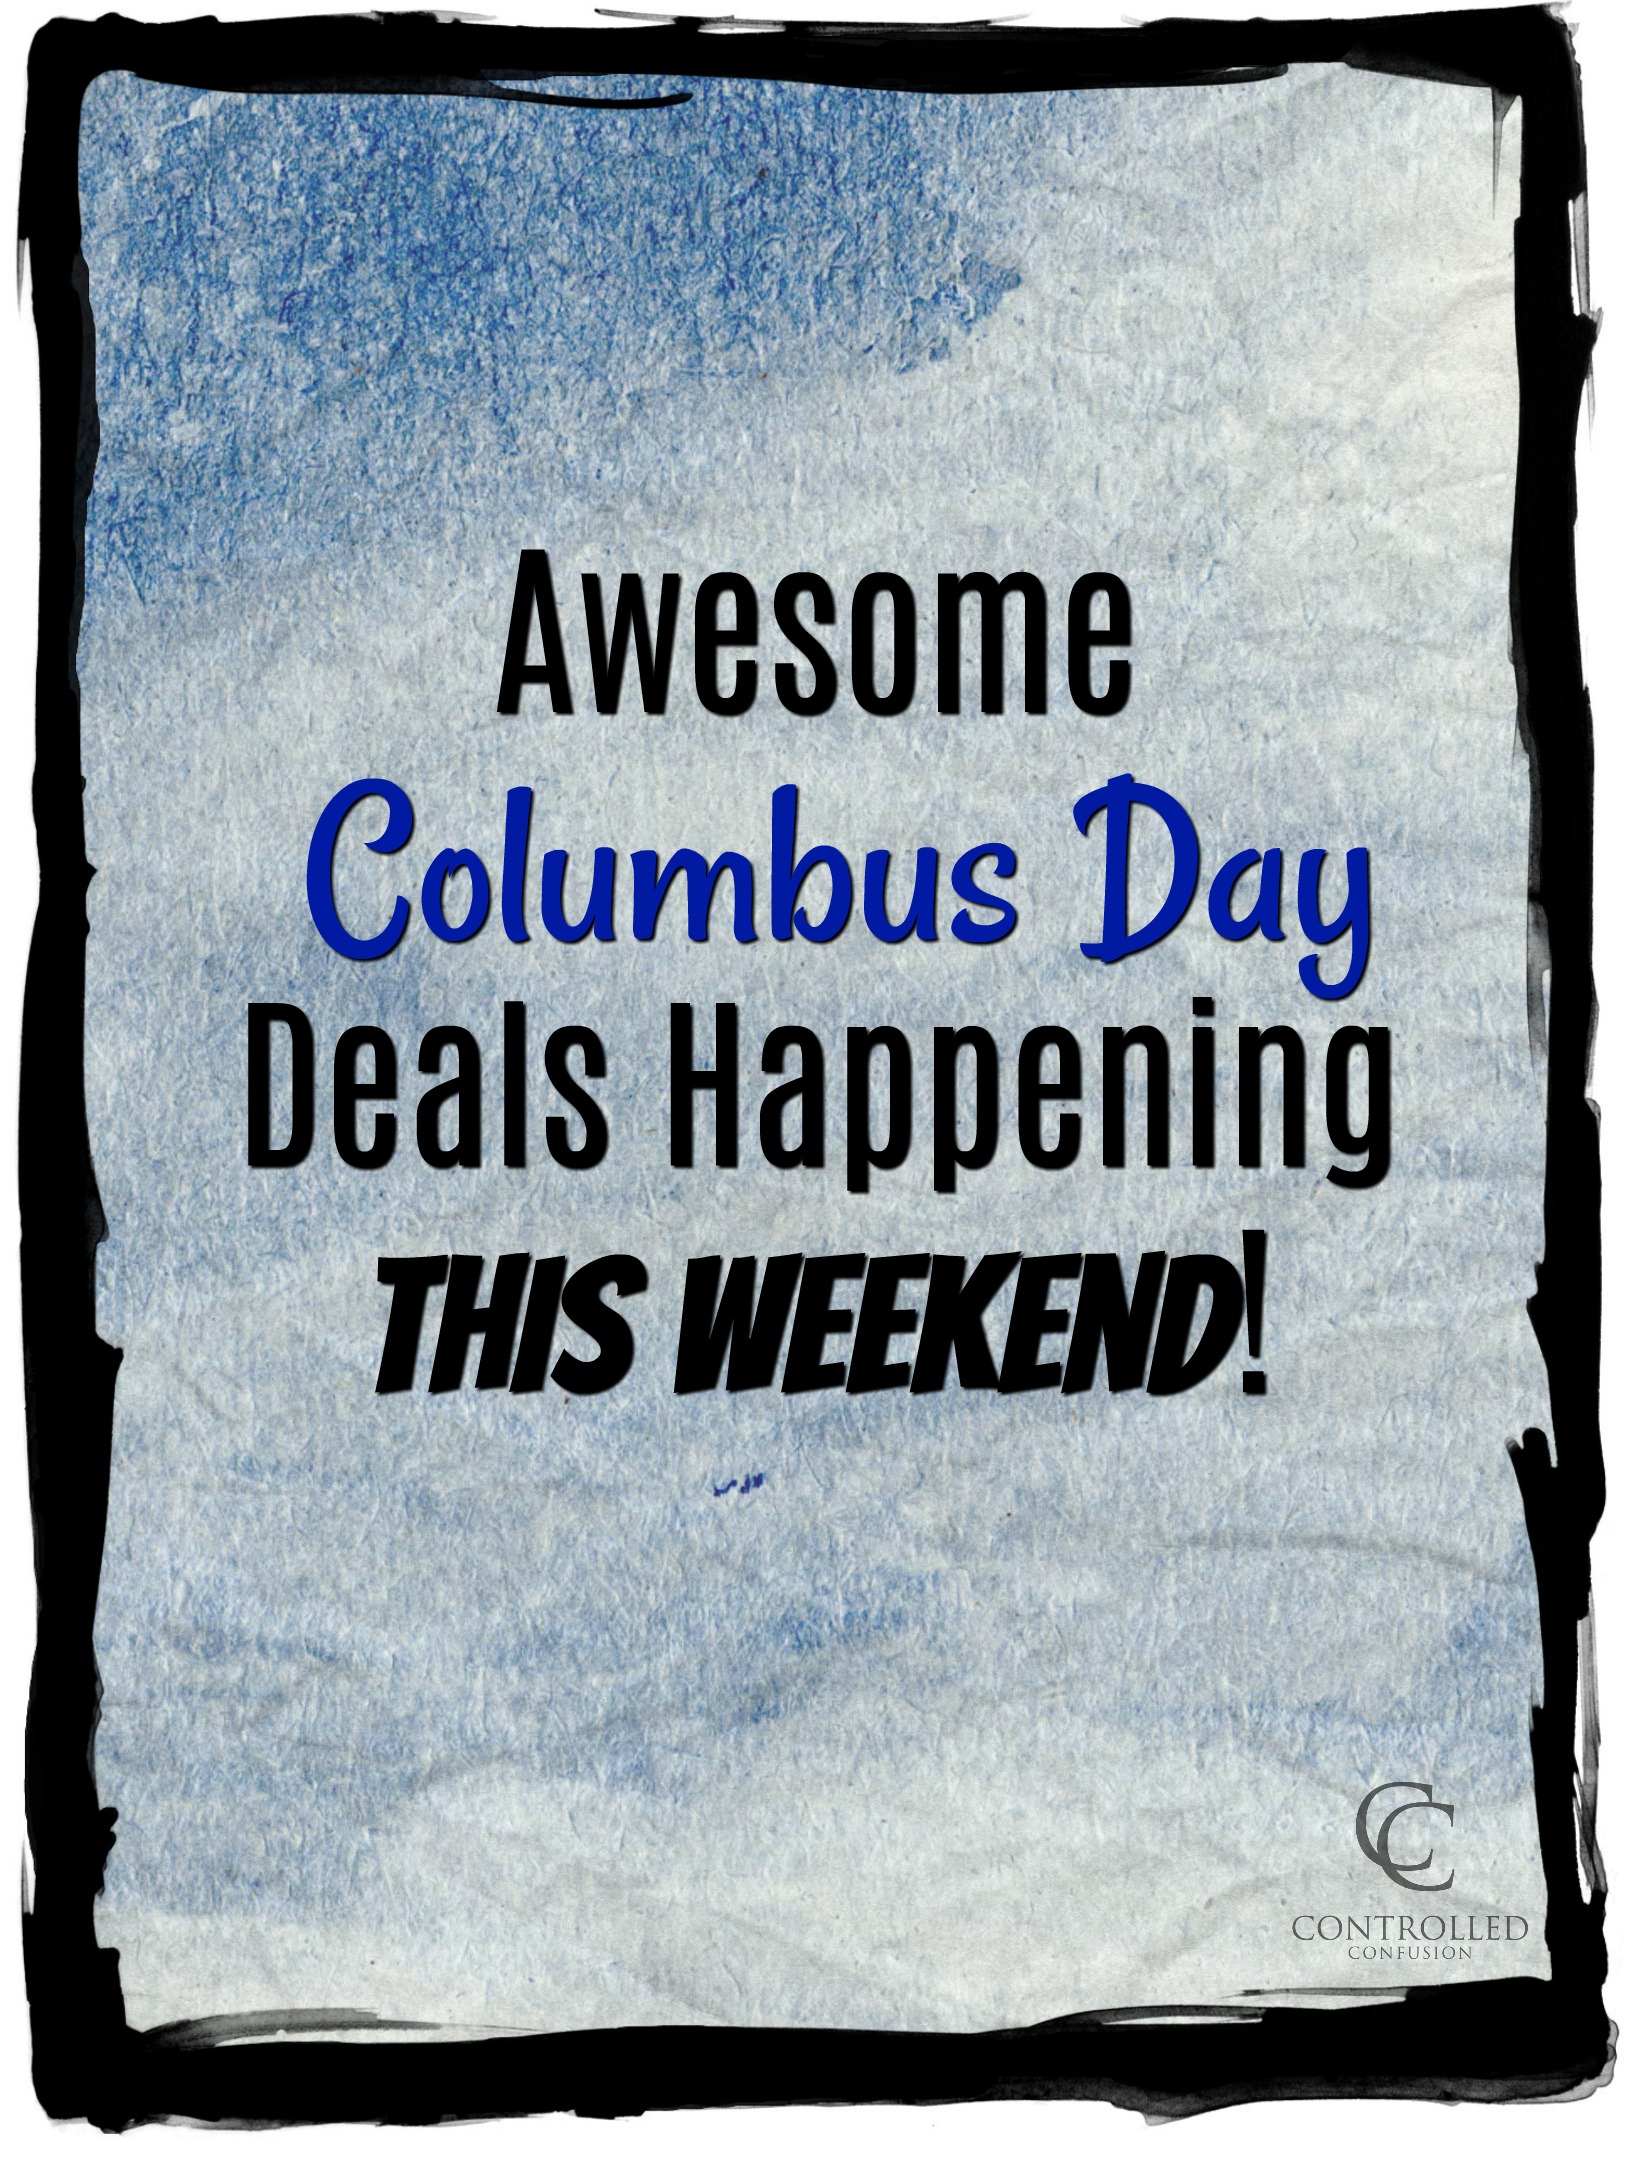 Awesome Columbus Day Deals Happening This Weekend!